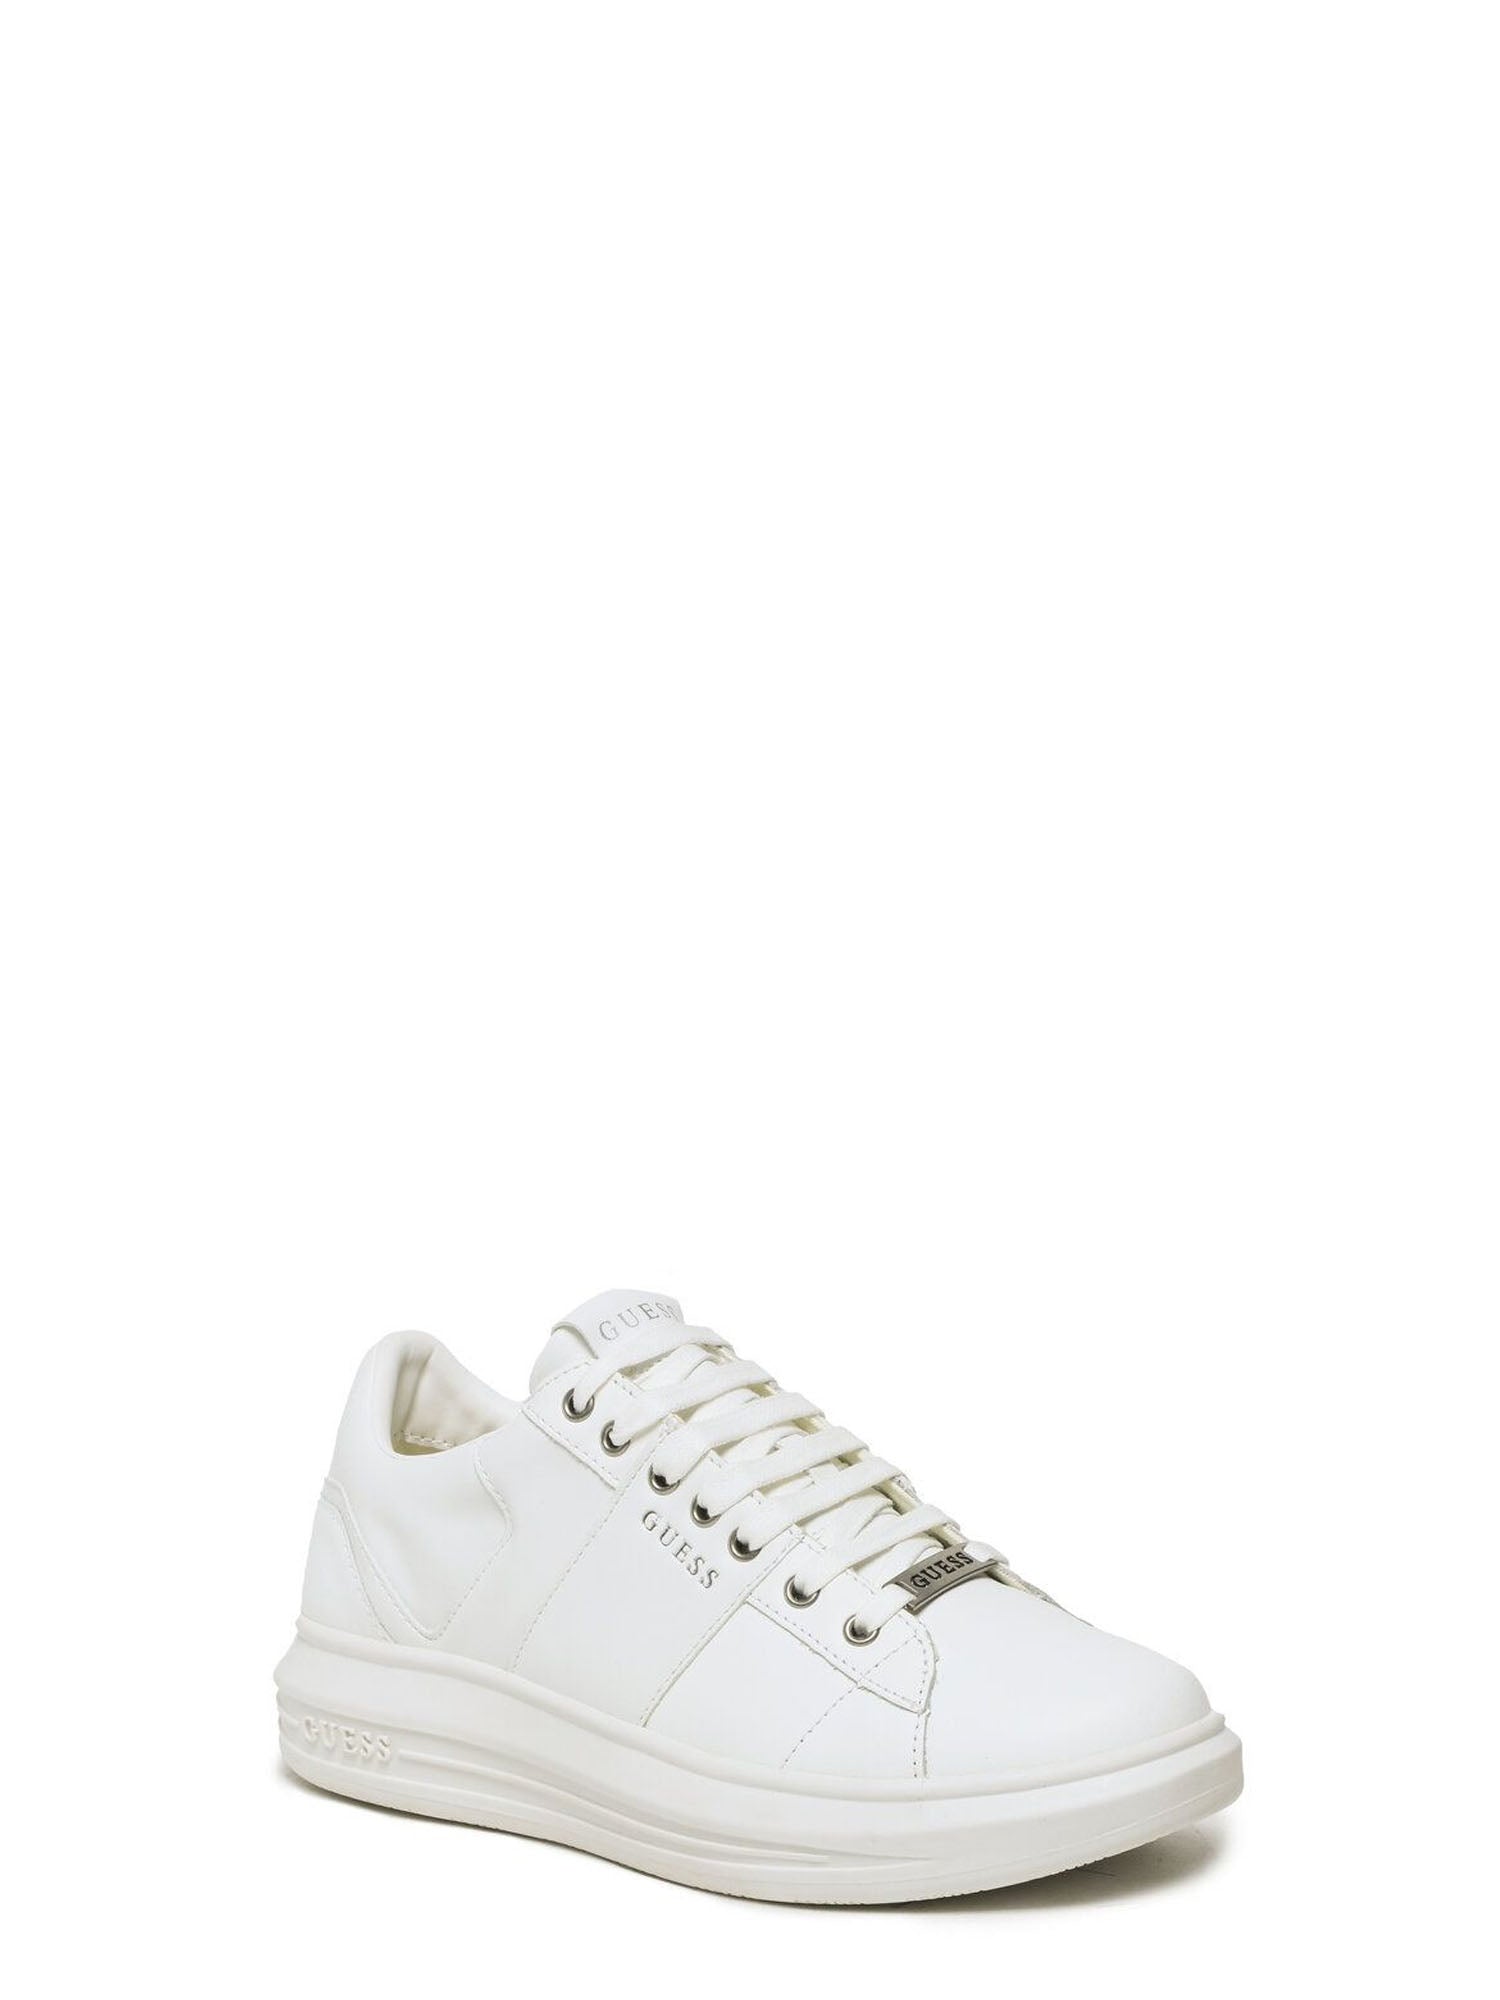 GUESS JEANS SHOES SNEAKERS VIBO CARRYOVER BIANCO